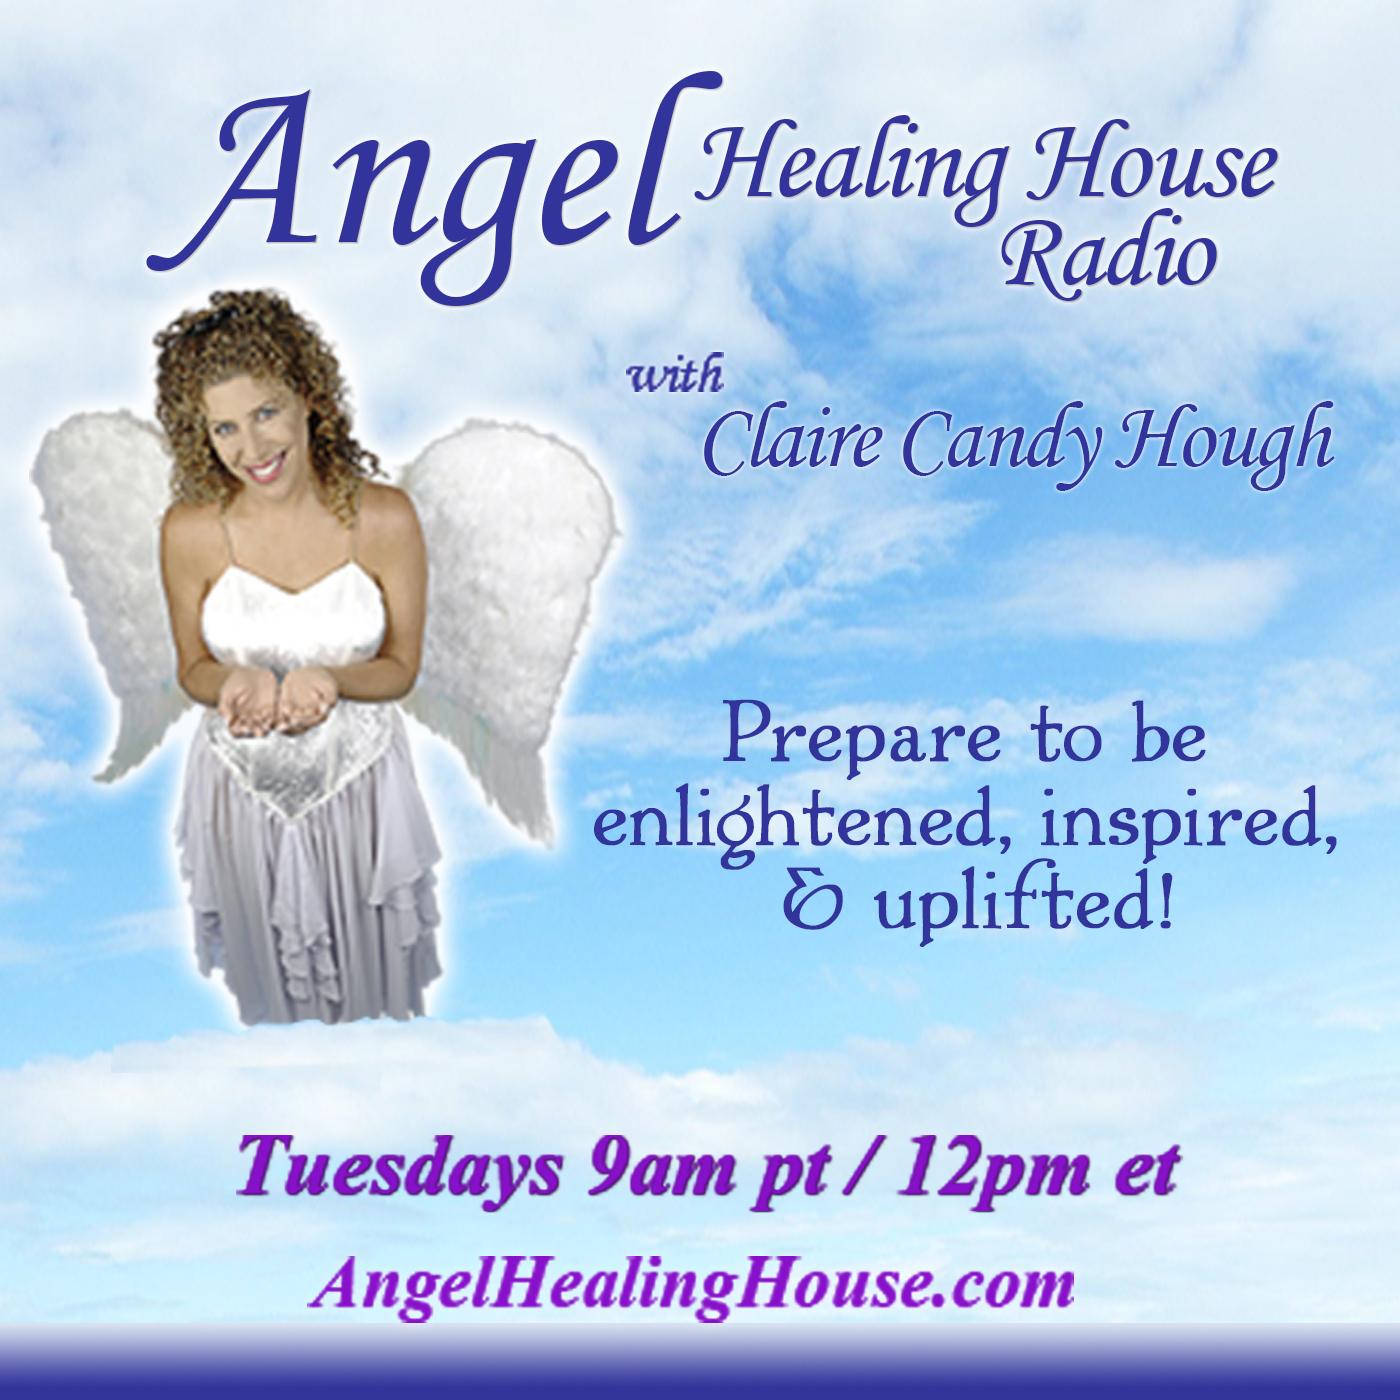 Angel Healing House Radio with Claire Candy Hough